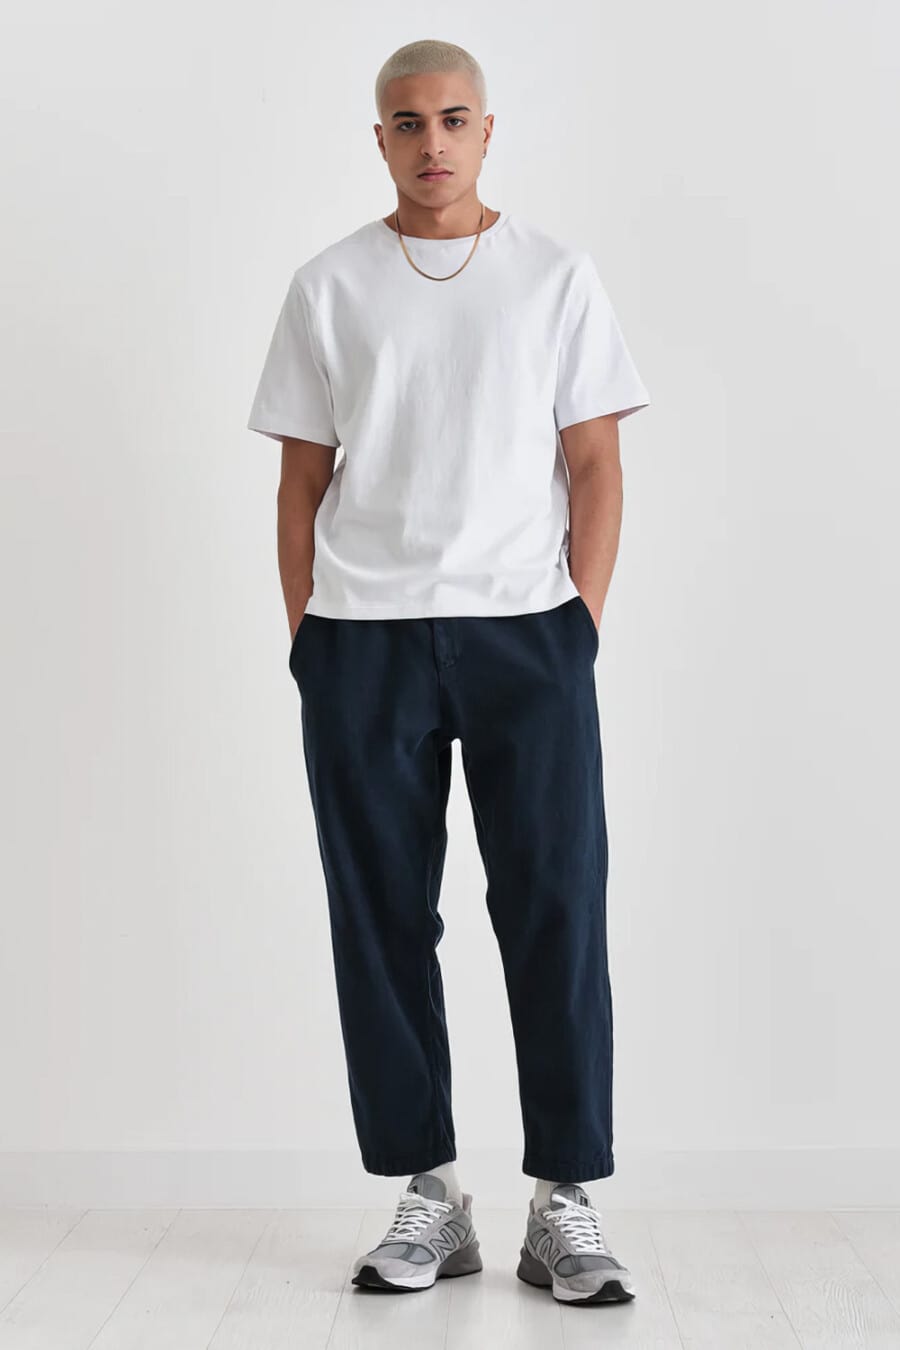 Men's wide cropped navy pants, white drop shoulder T-shirt and grey New Balance running sneakers outfit